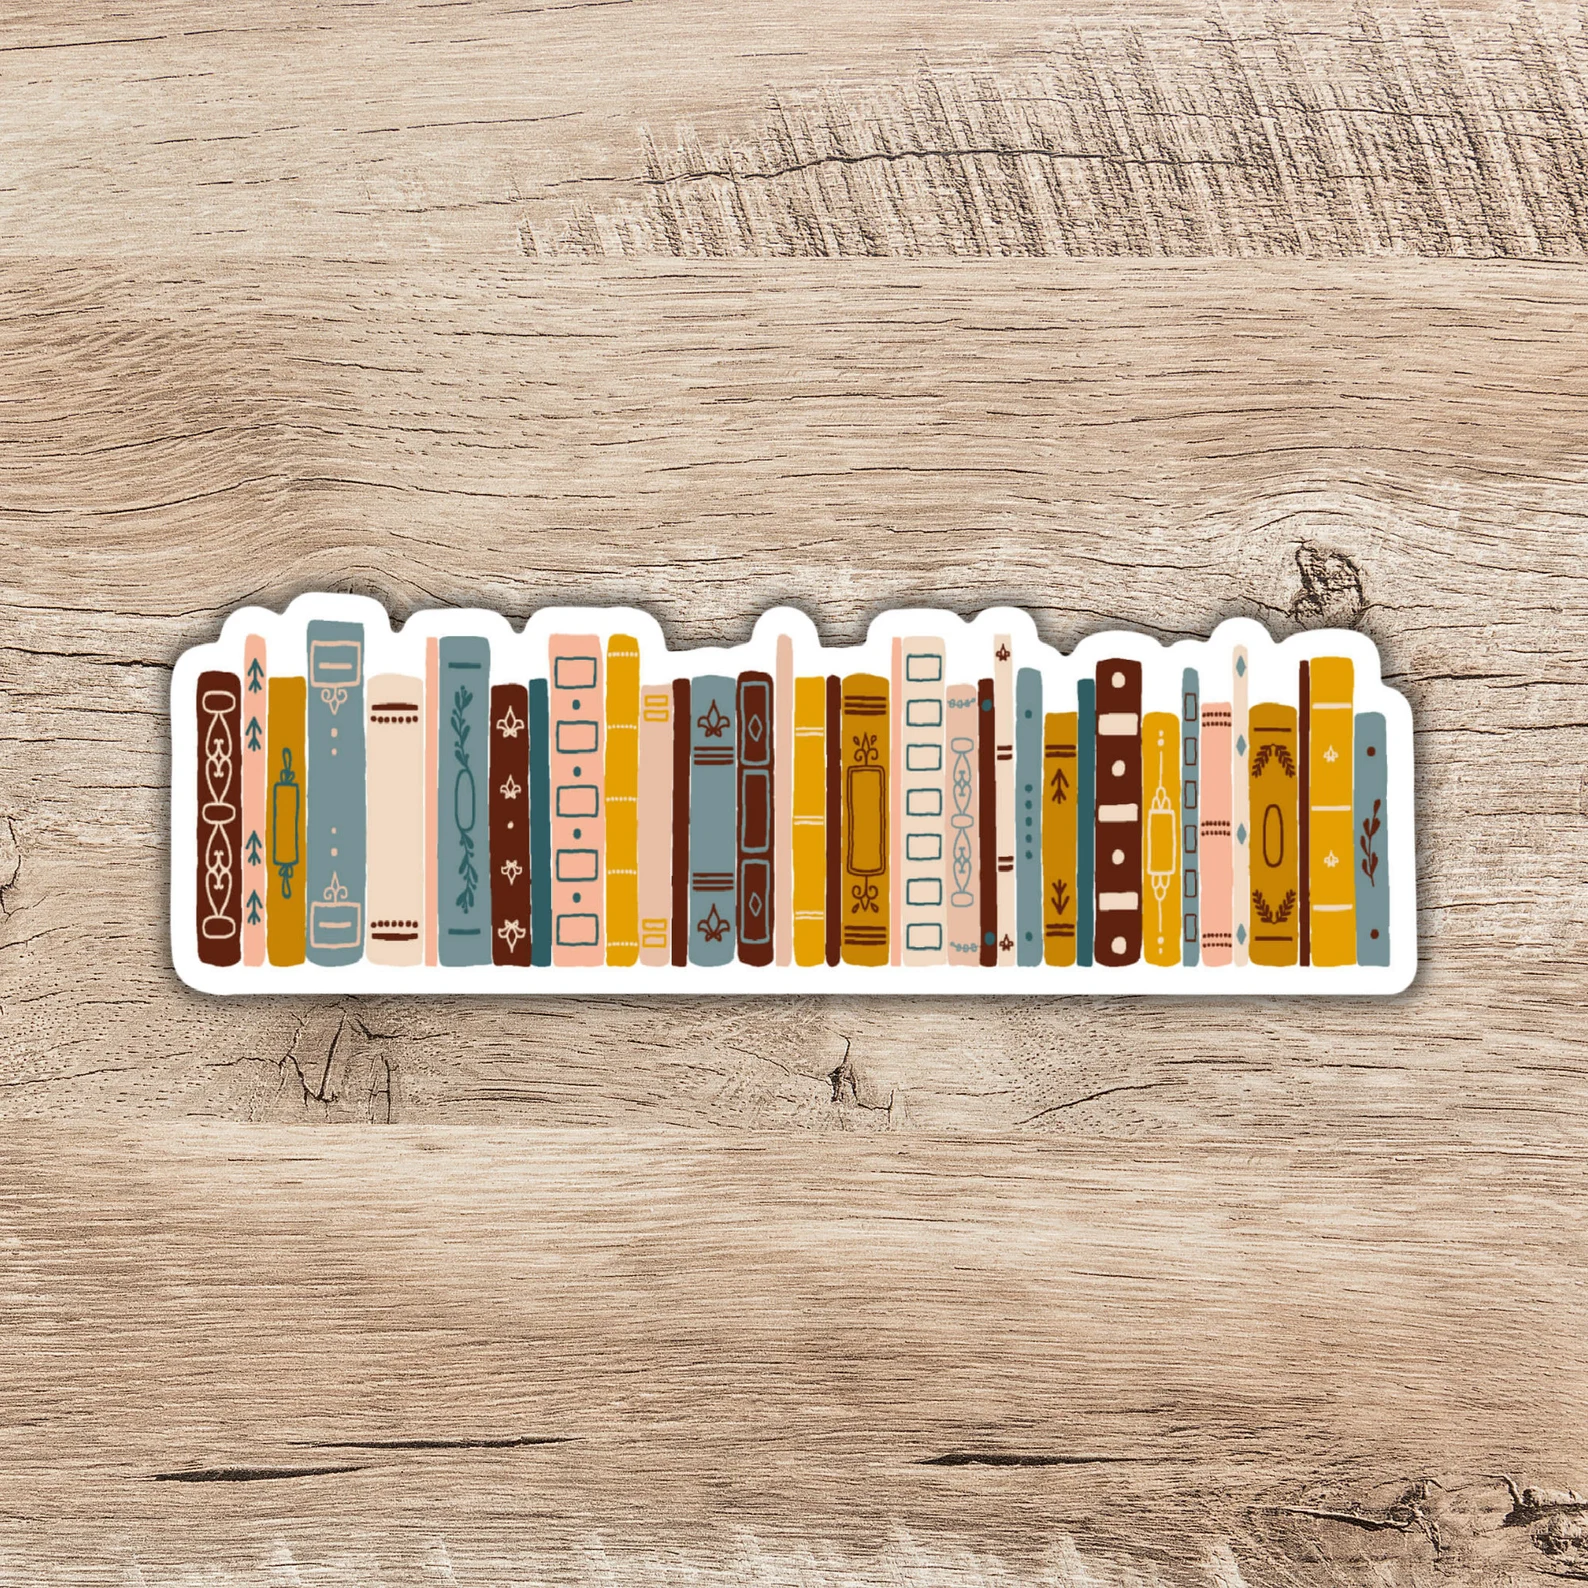 A sticker depicting a row of vintage book spines